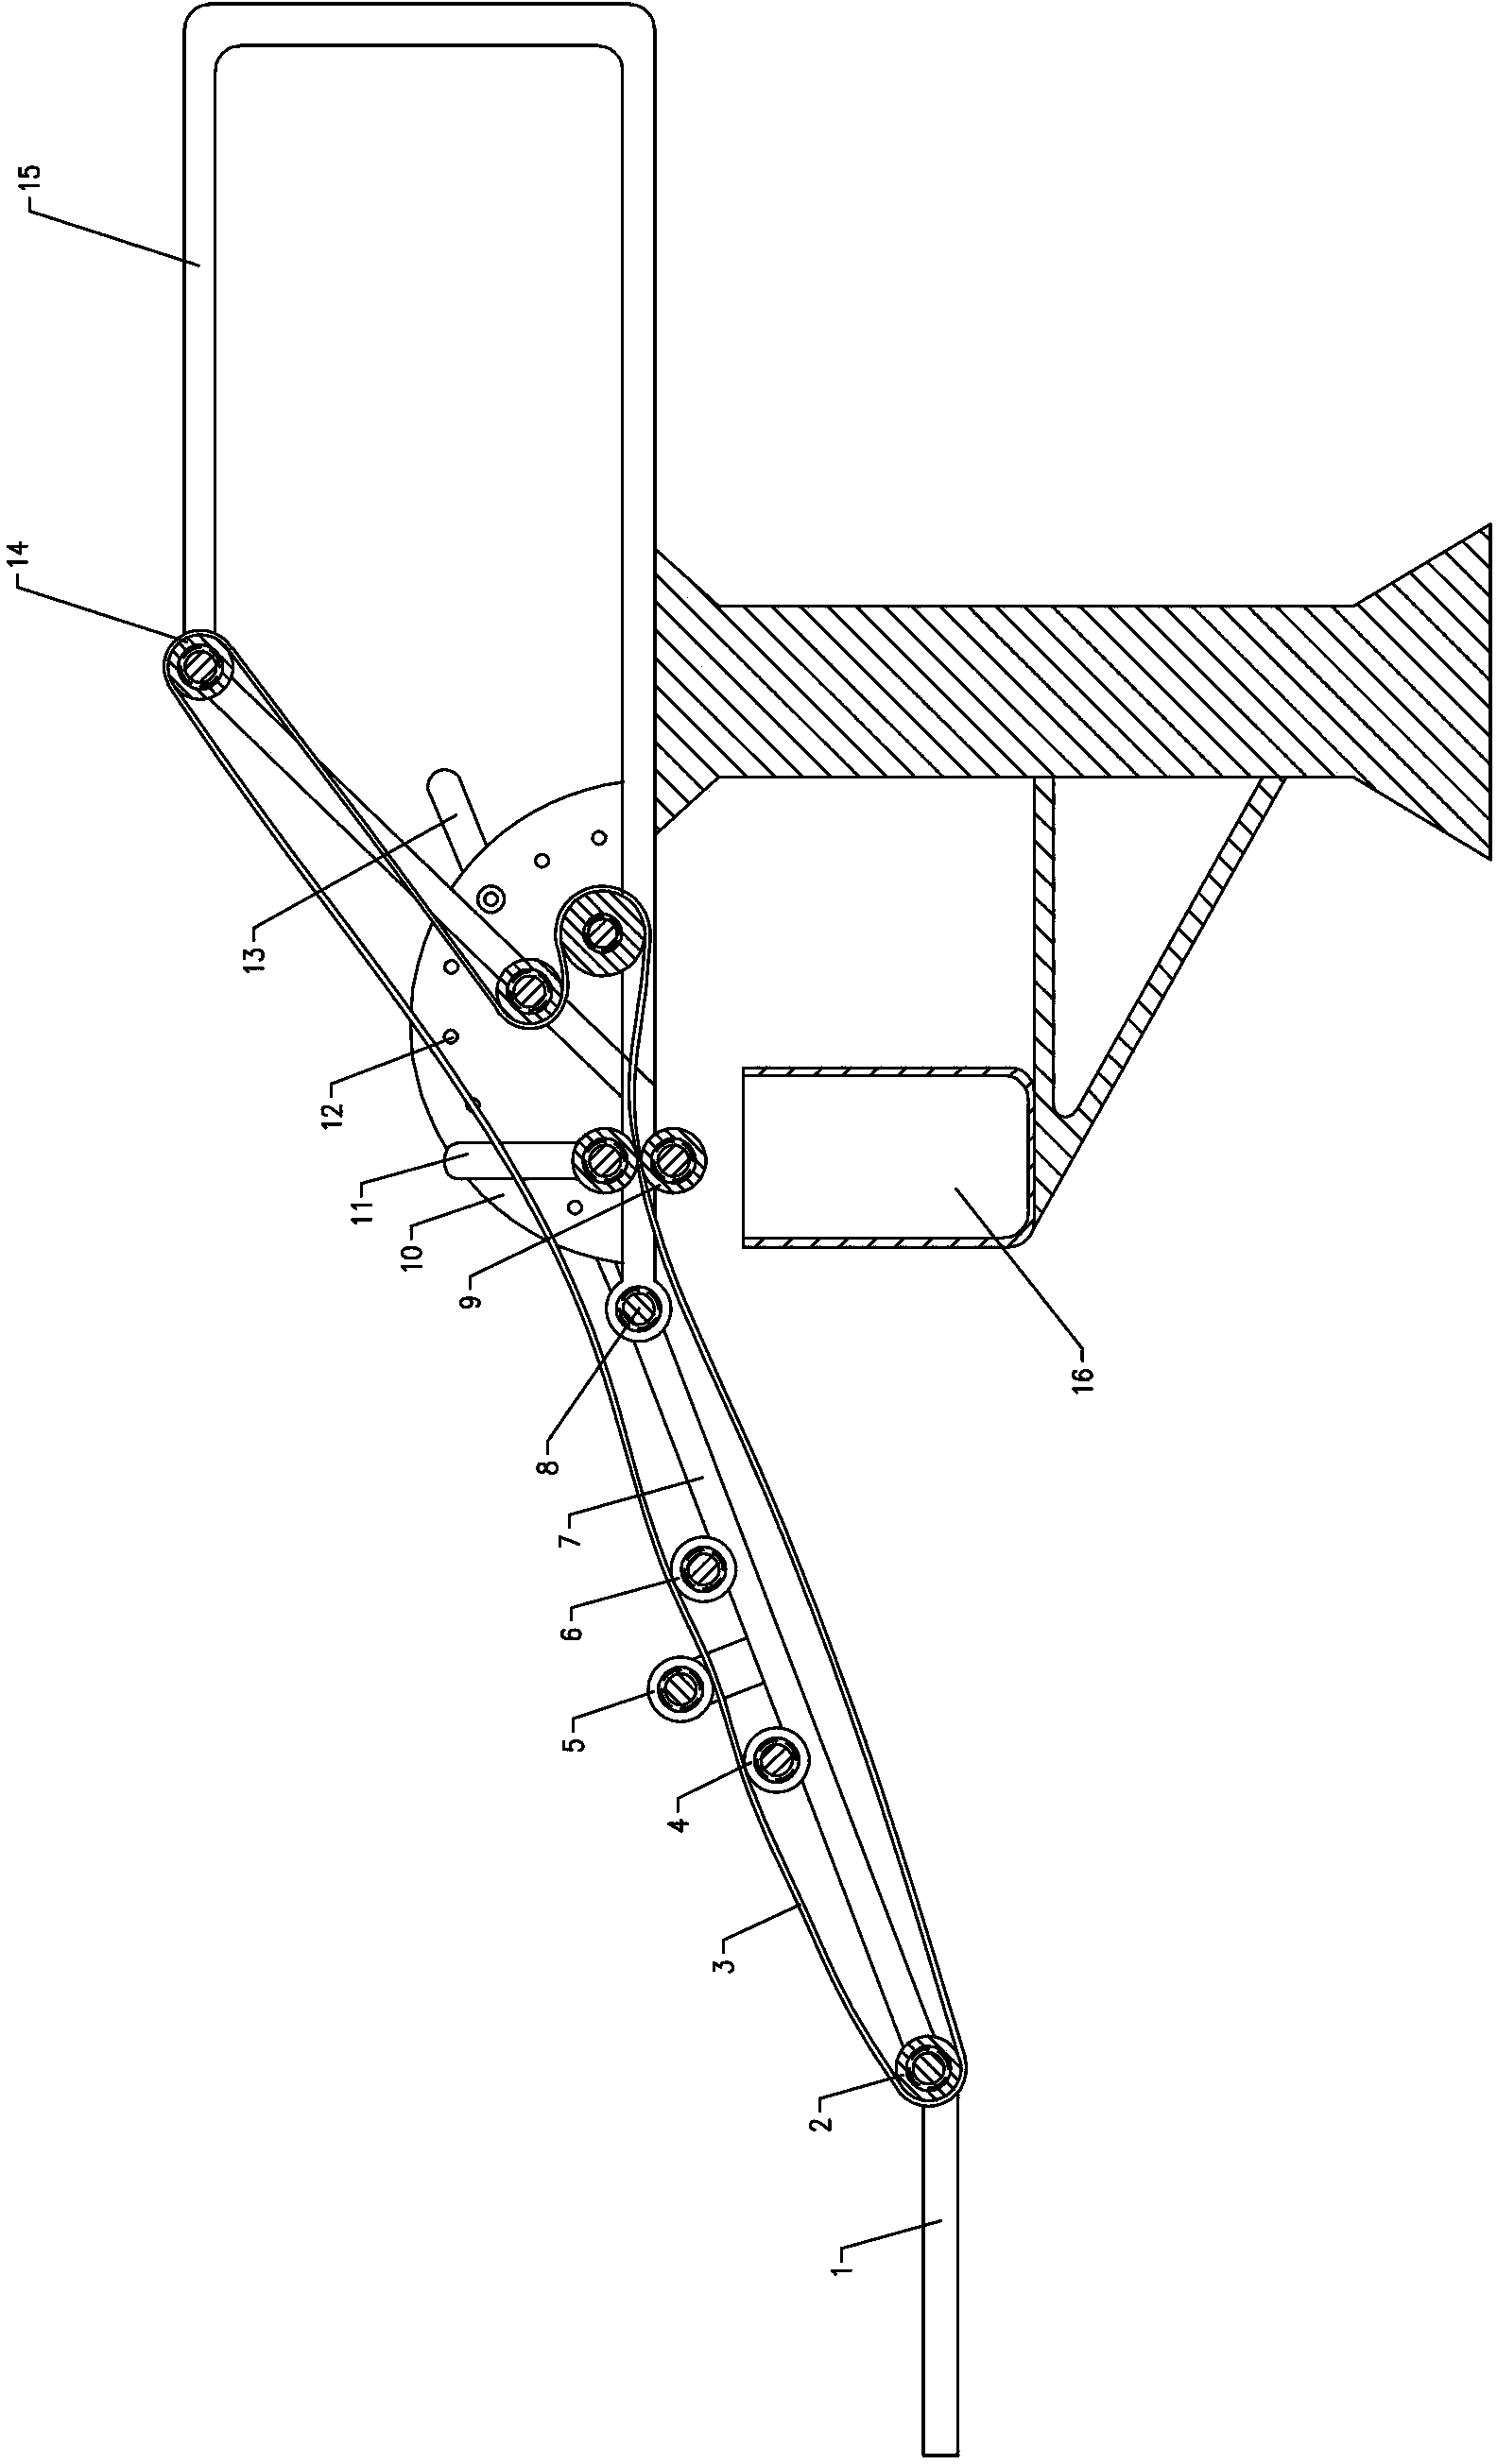 Device for collecting oil on water surface